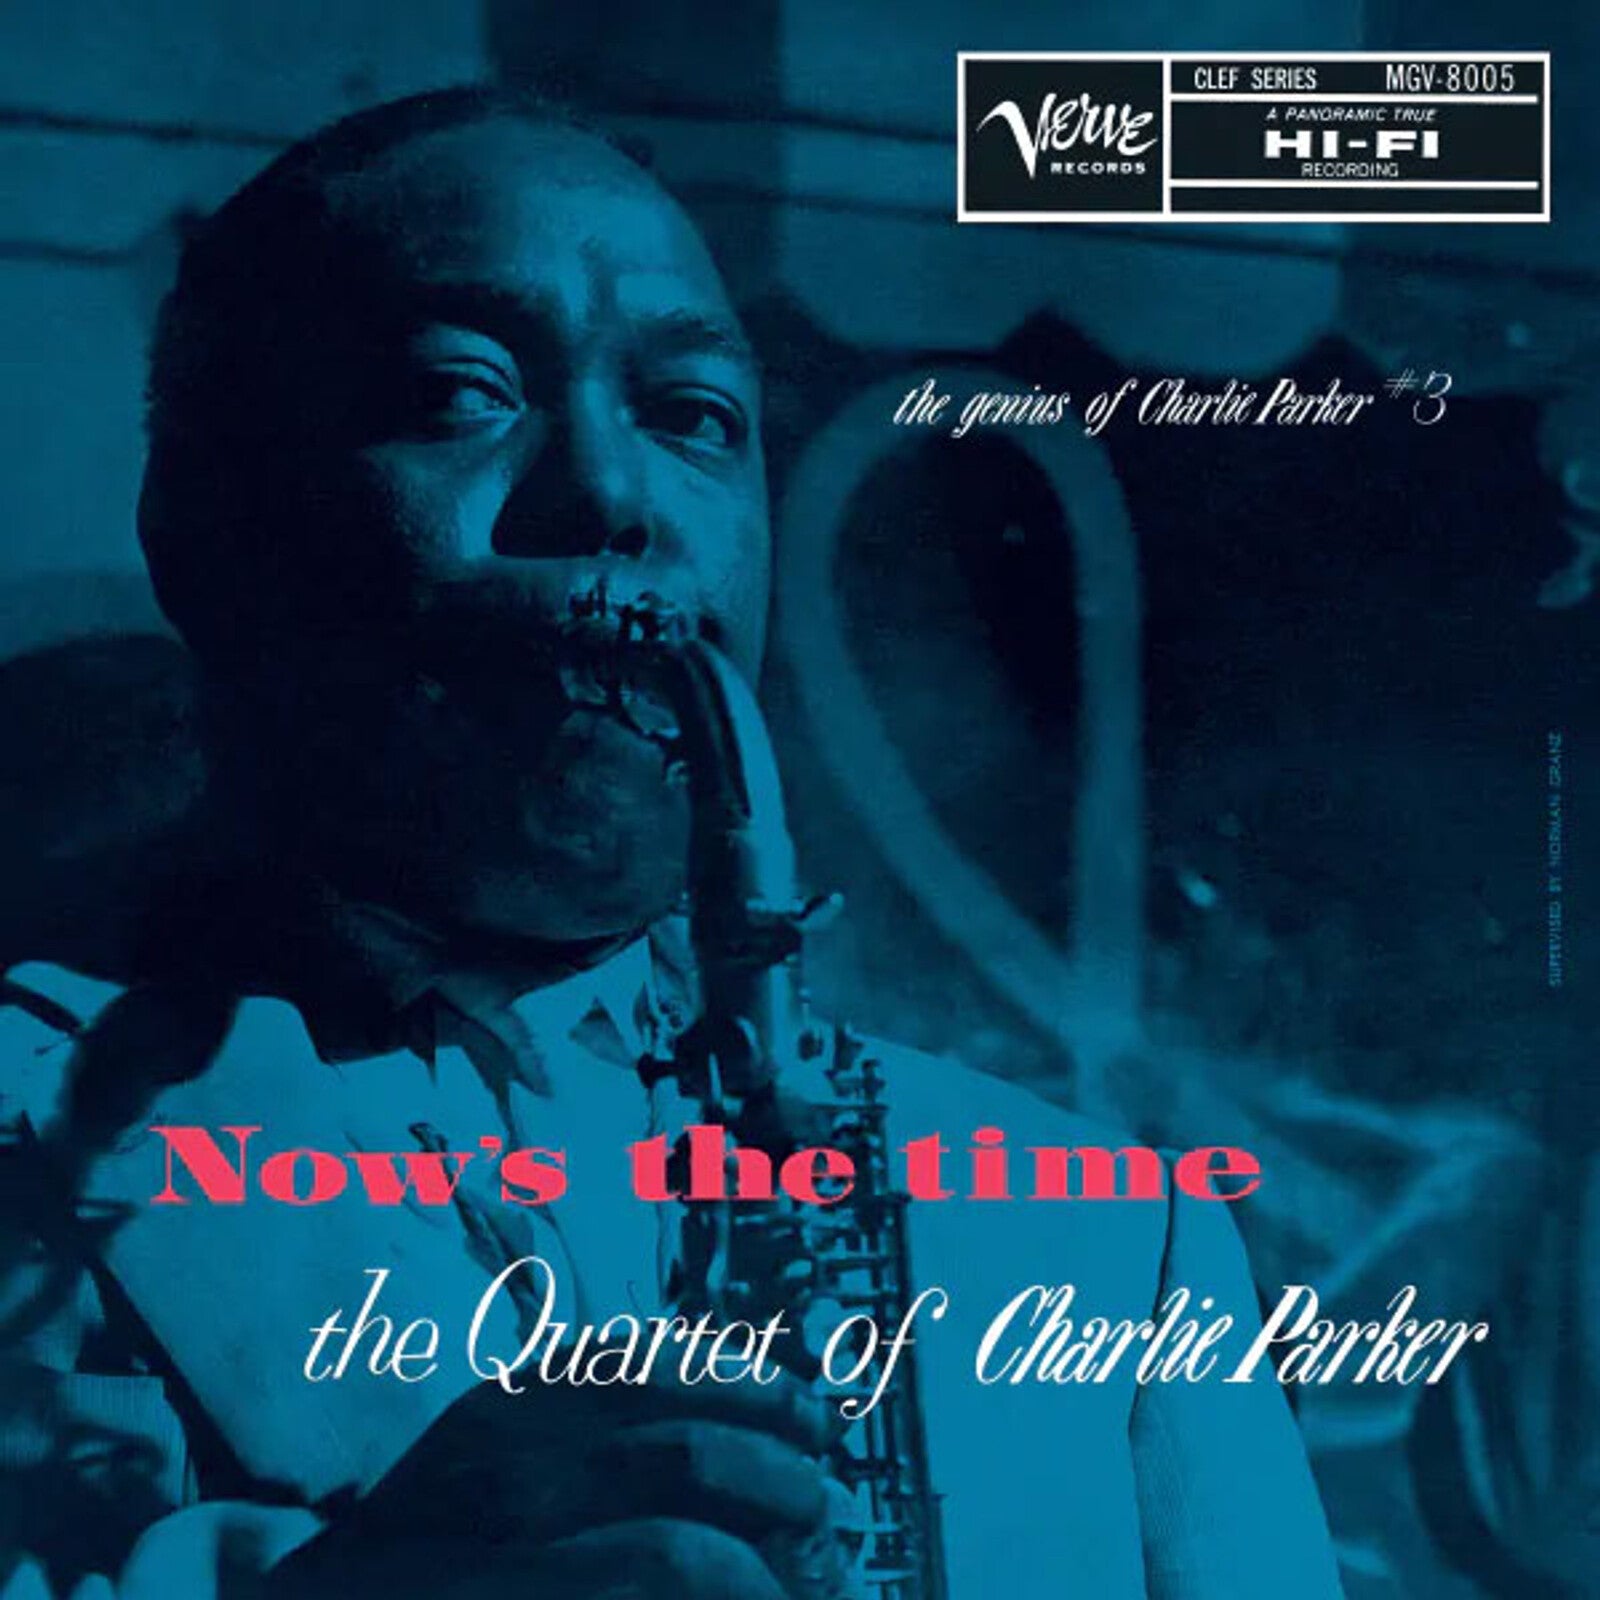 Charlie Parker - The Time: The Genius Of Charlie Parker # 3 [Verve By Request Series]